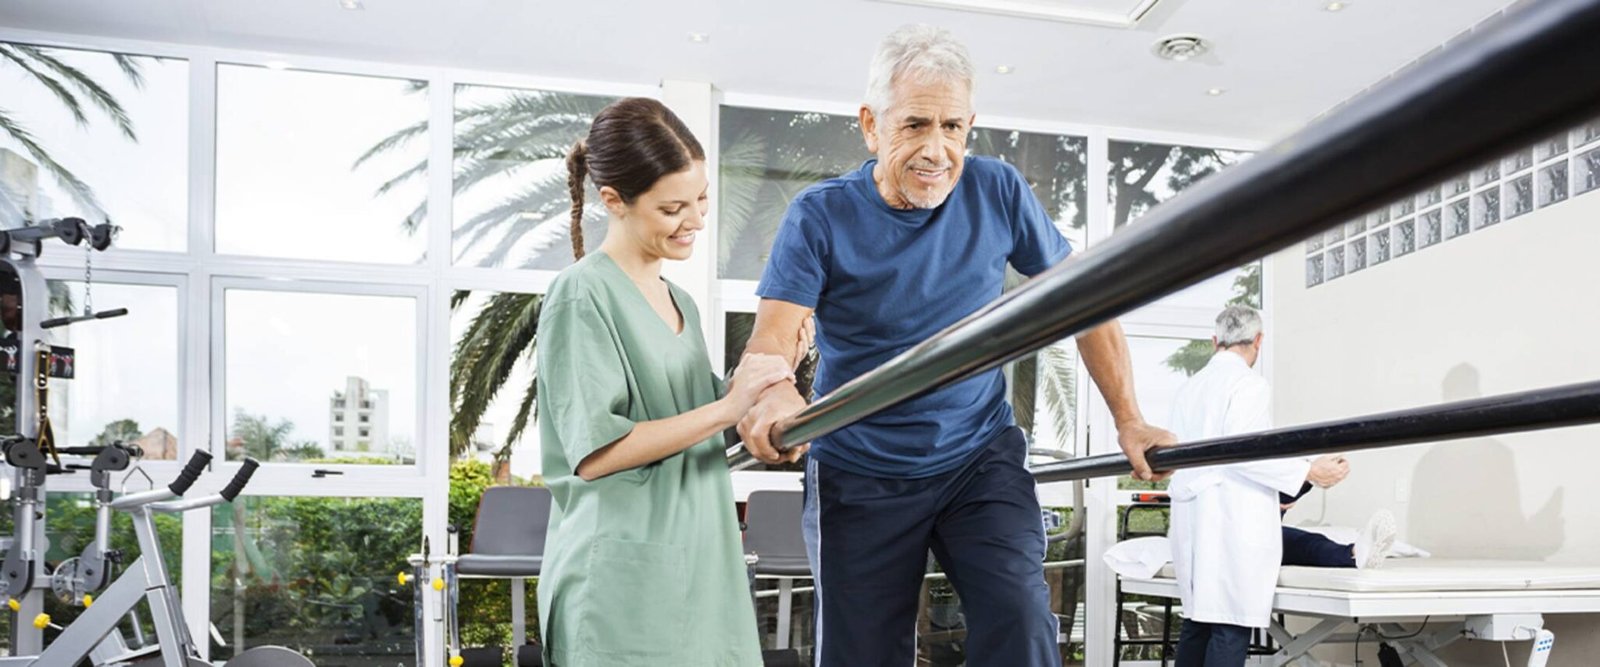 OTP training senior how to maintain balance after rehab ends